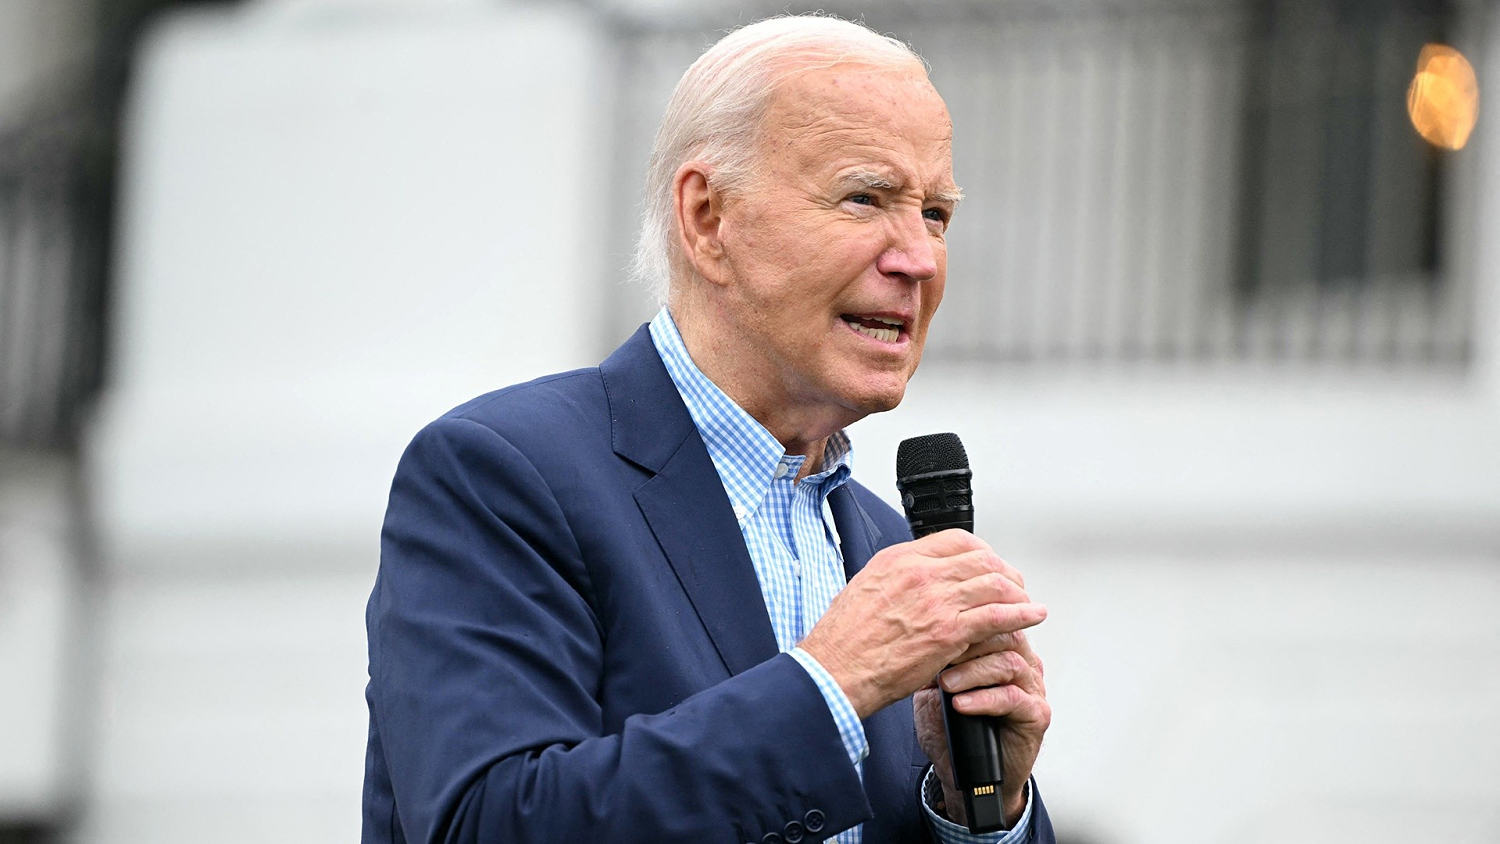 President Biden under increasing pressure to drop out of race